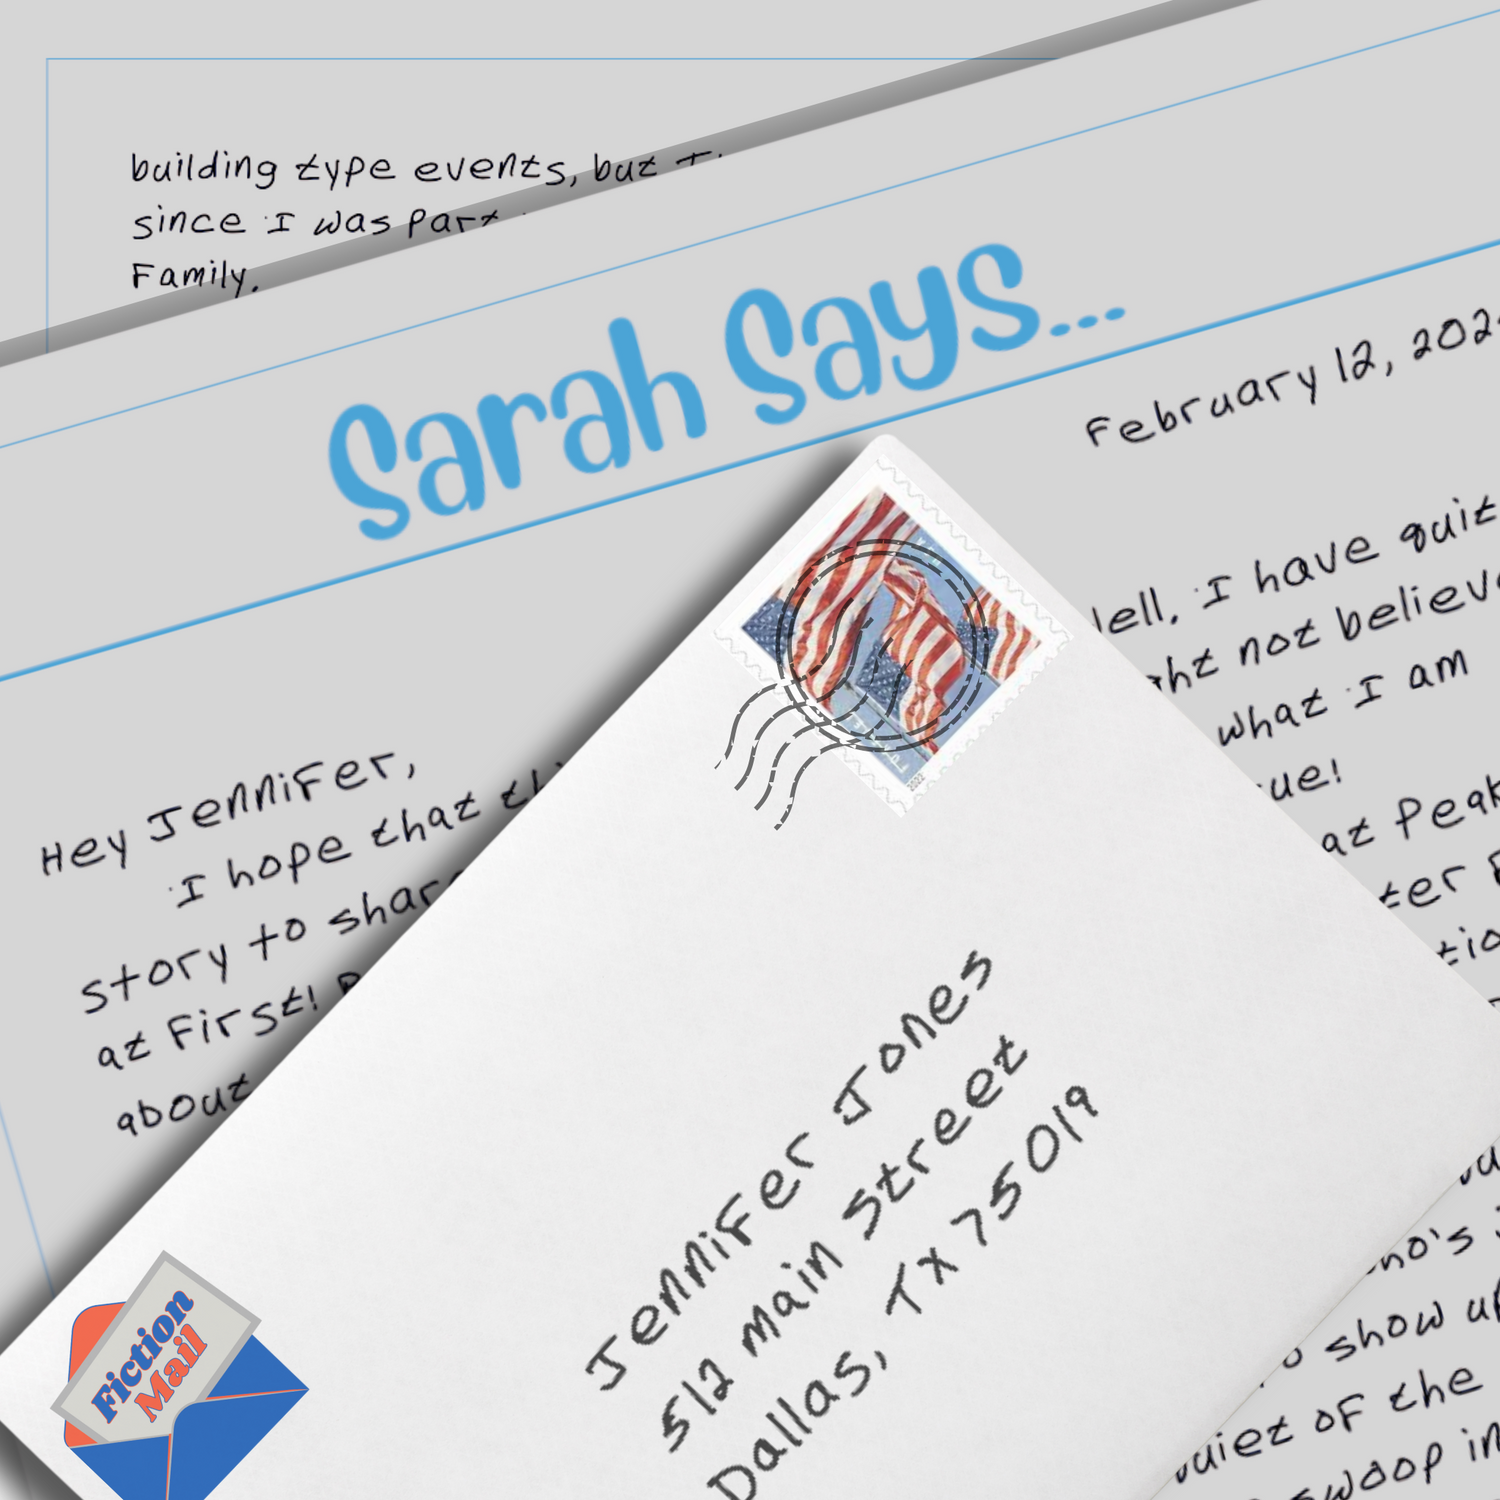 Fiction Mail - fun fiction mailed as personalized letters